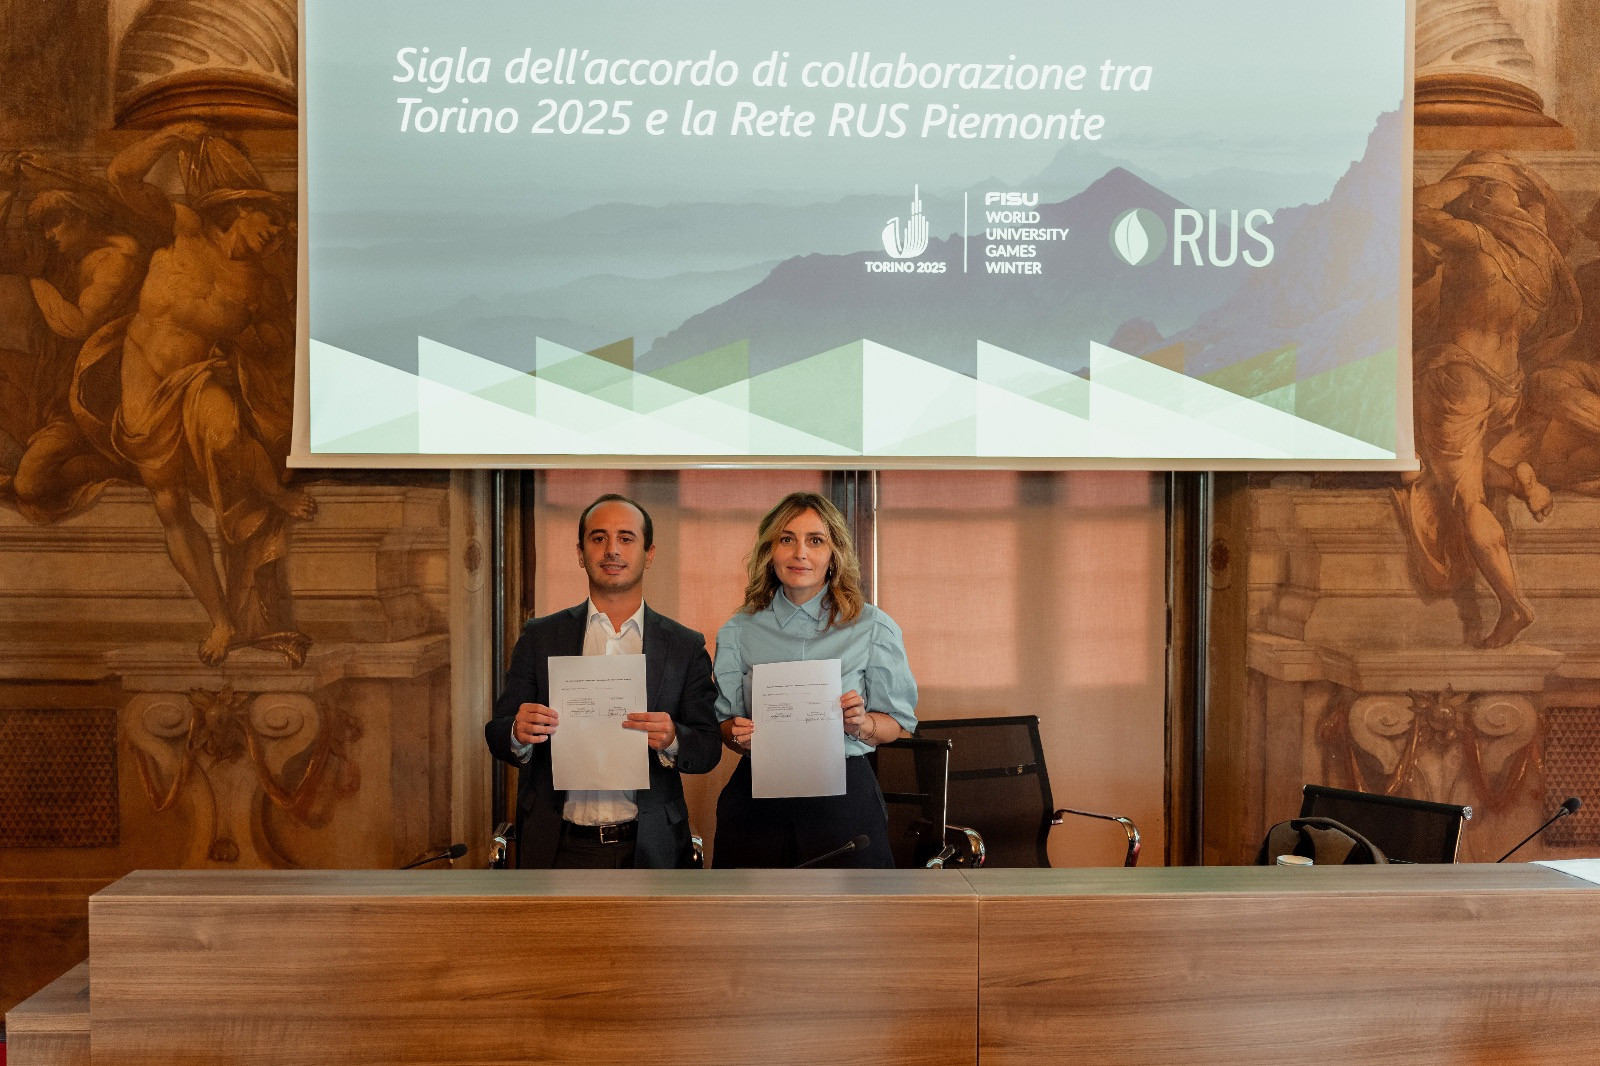 Turin 2025 will work with RUS Piemonte to measure the sustainability of the 2025 Winter World University Games ©Torino 2025